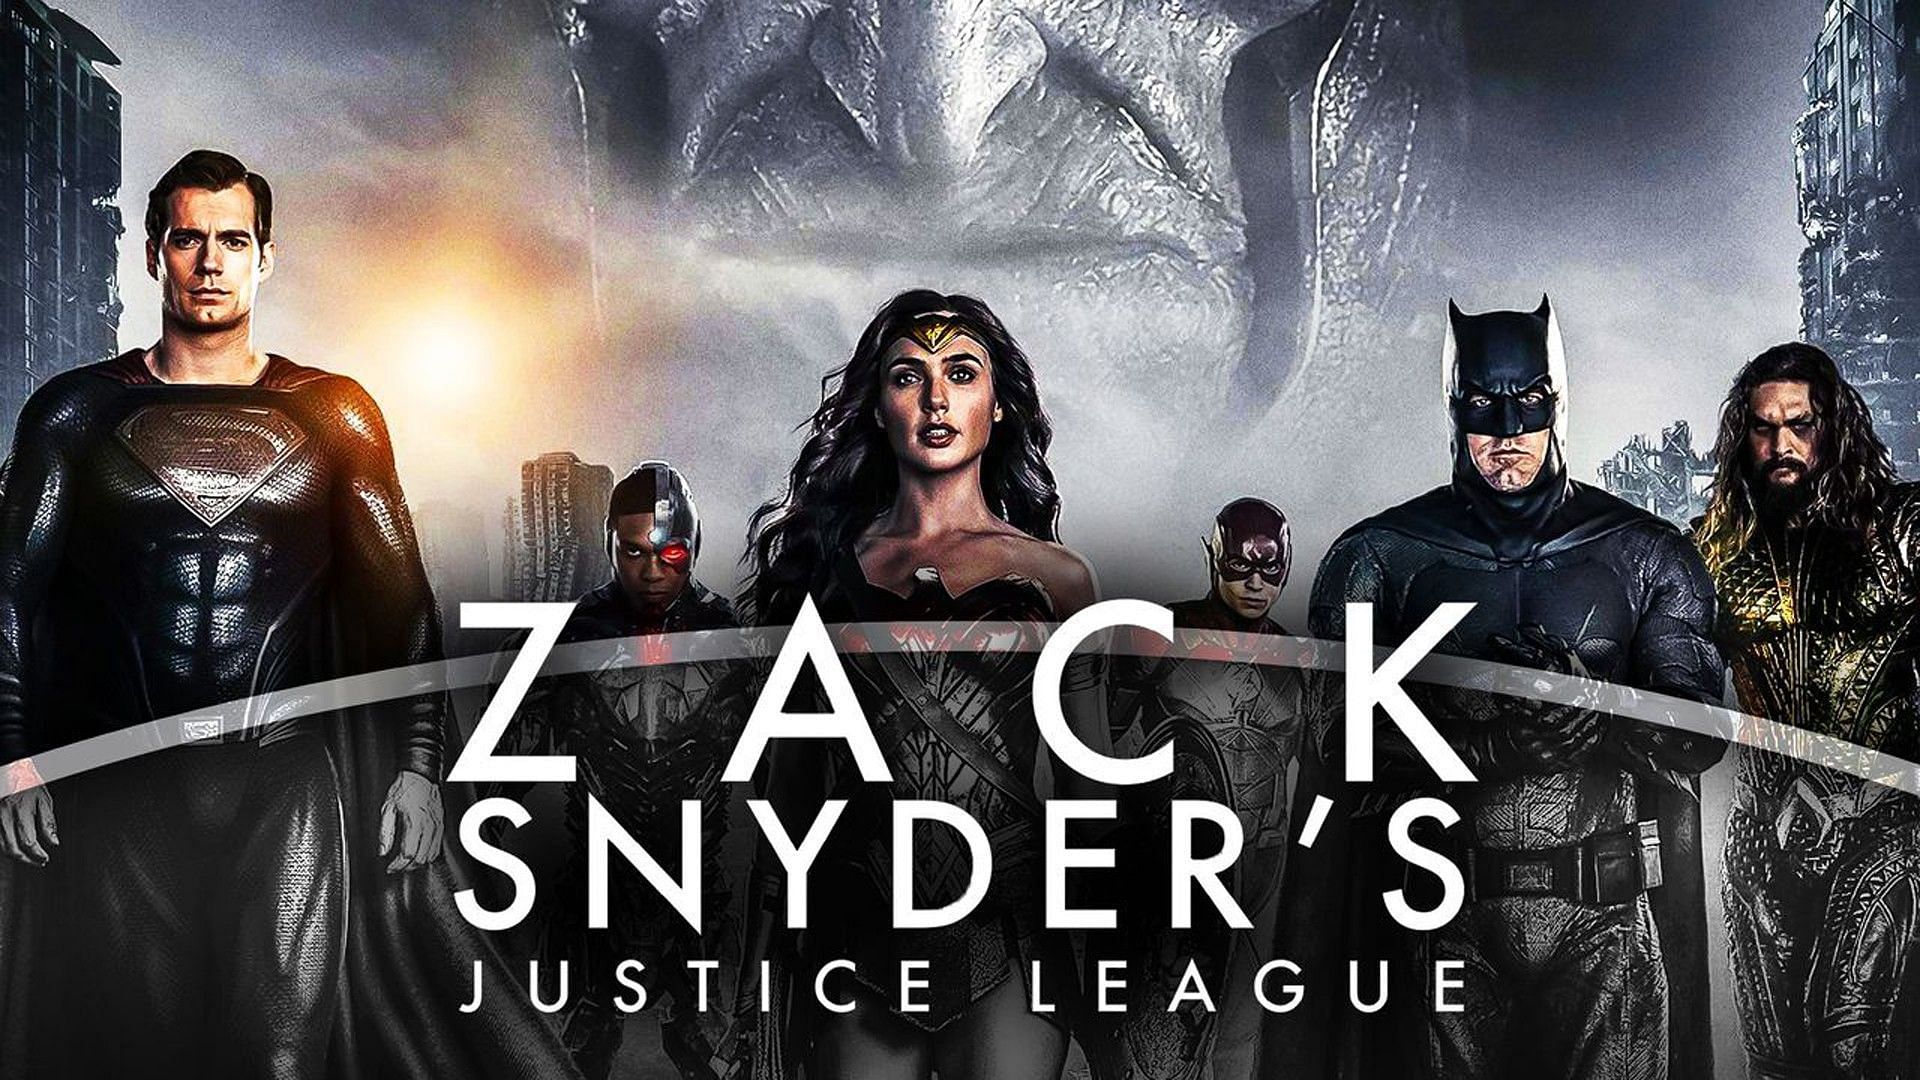 Zack Snyders Justice League Comparing It To The Original 